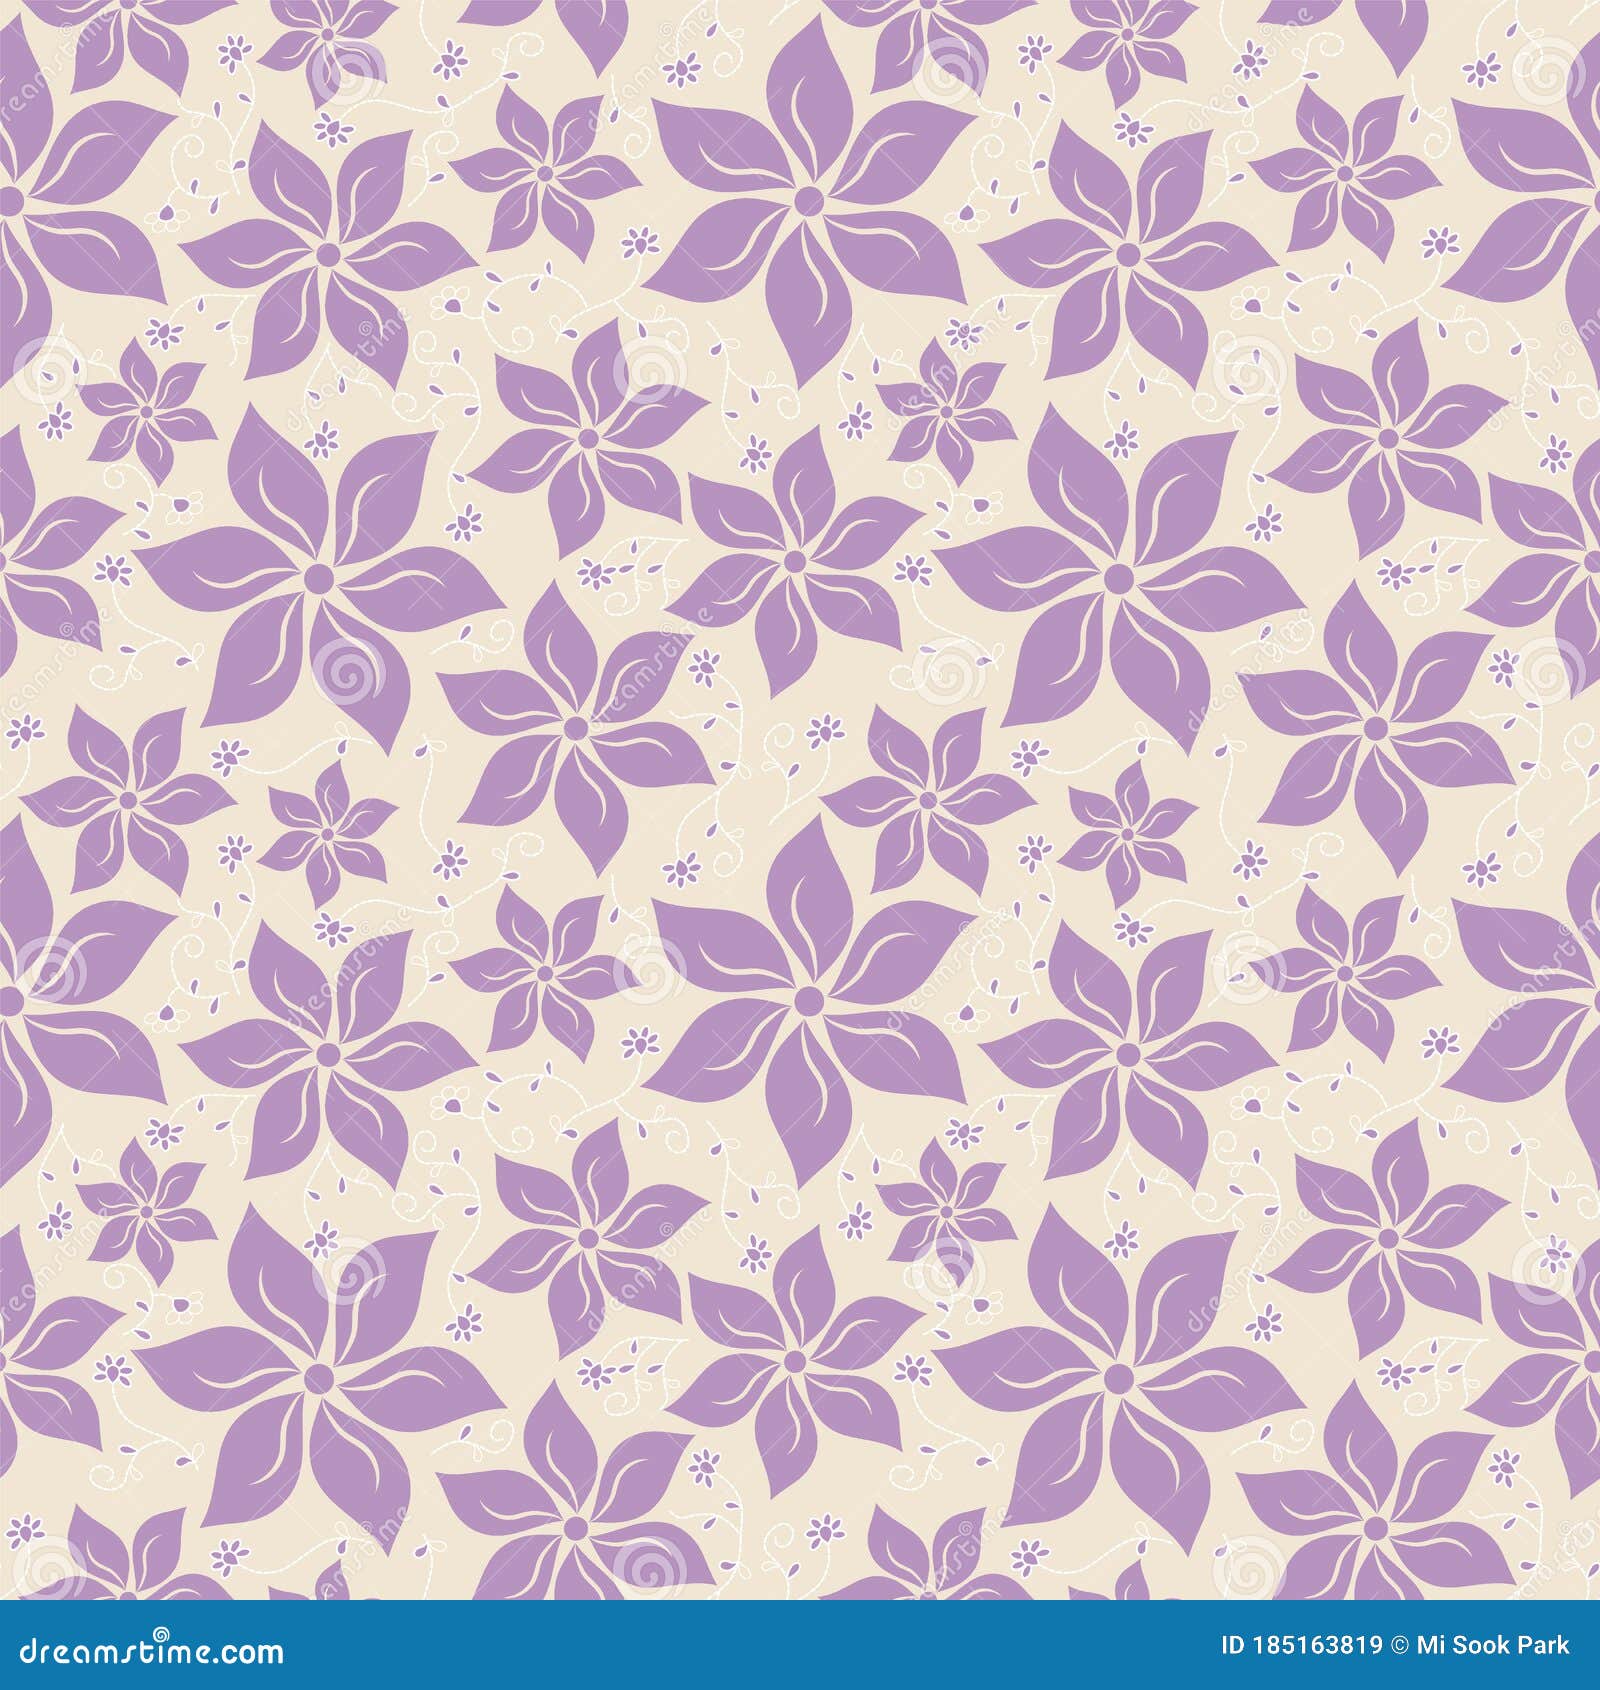 Vector Purple Ditsy Floral Stitch Textreed Seamless Pattern Background ...